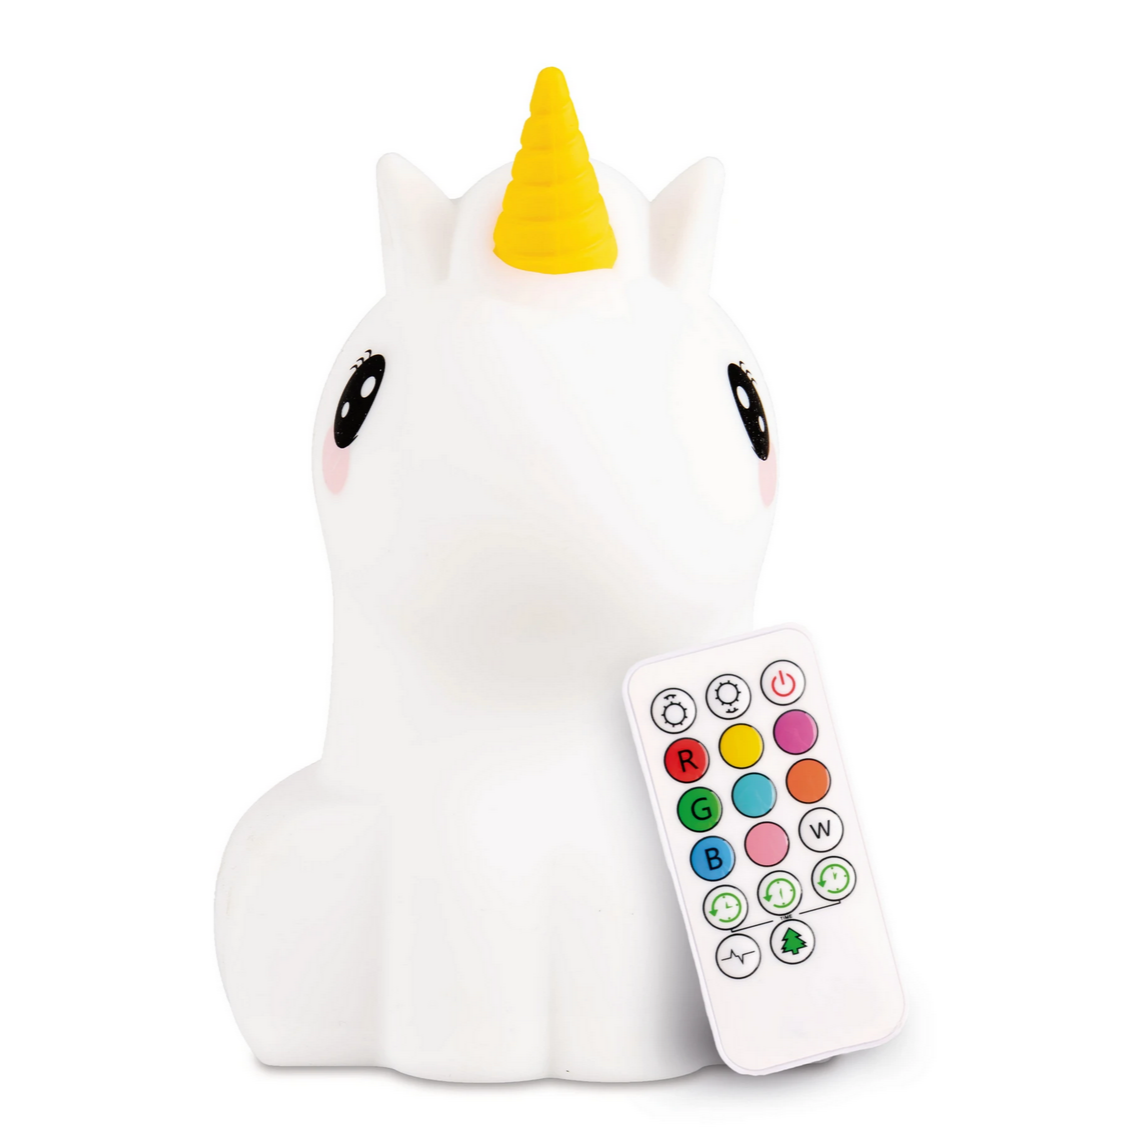 white unicorn light with yellow horn next to color remote control